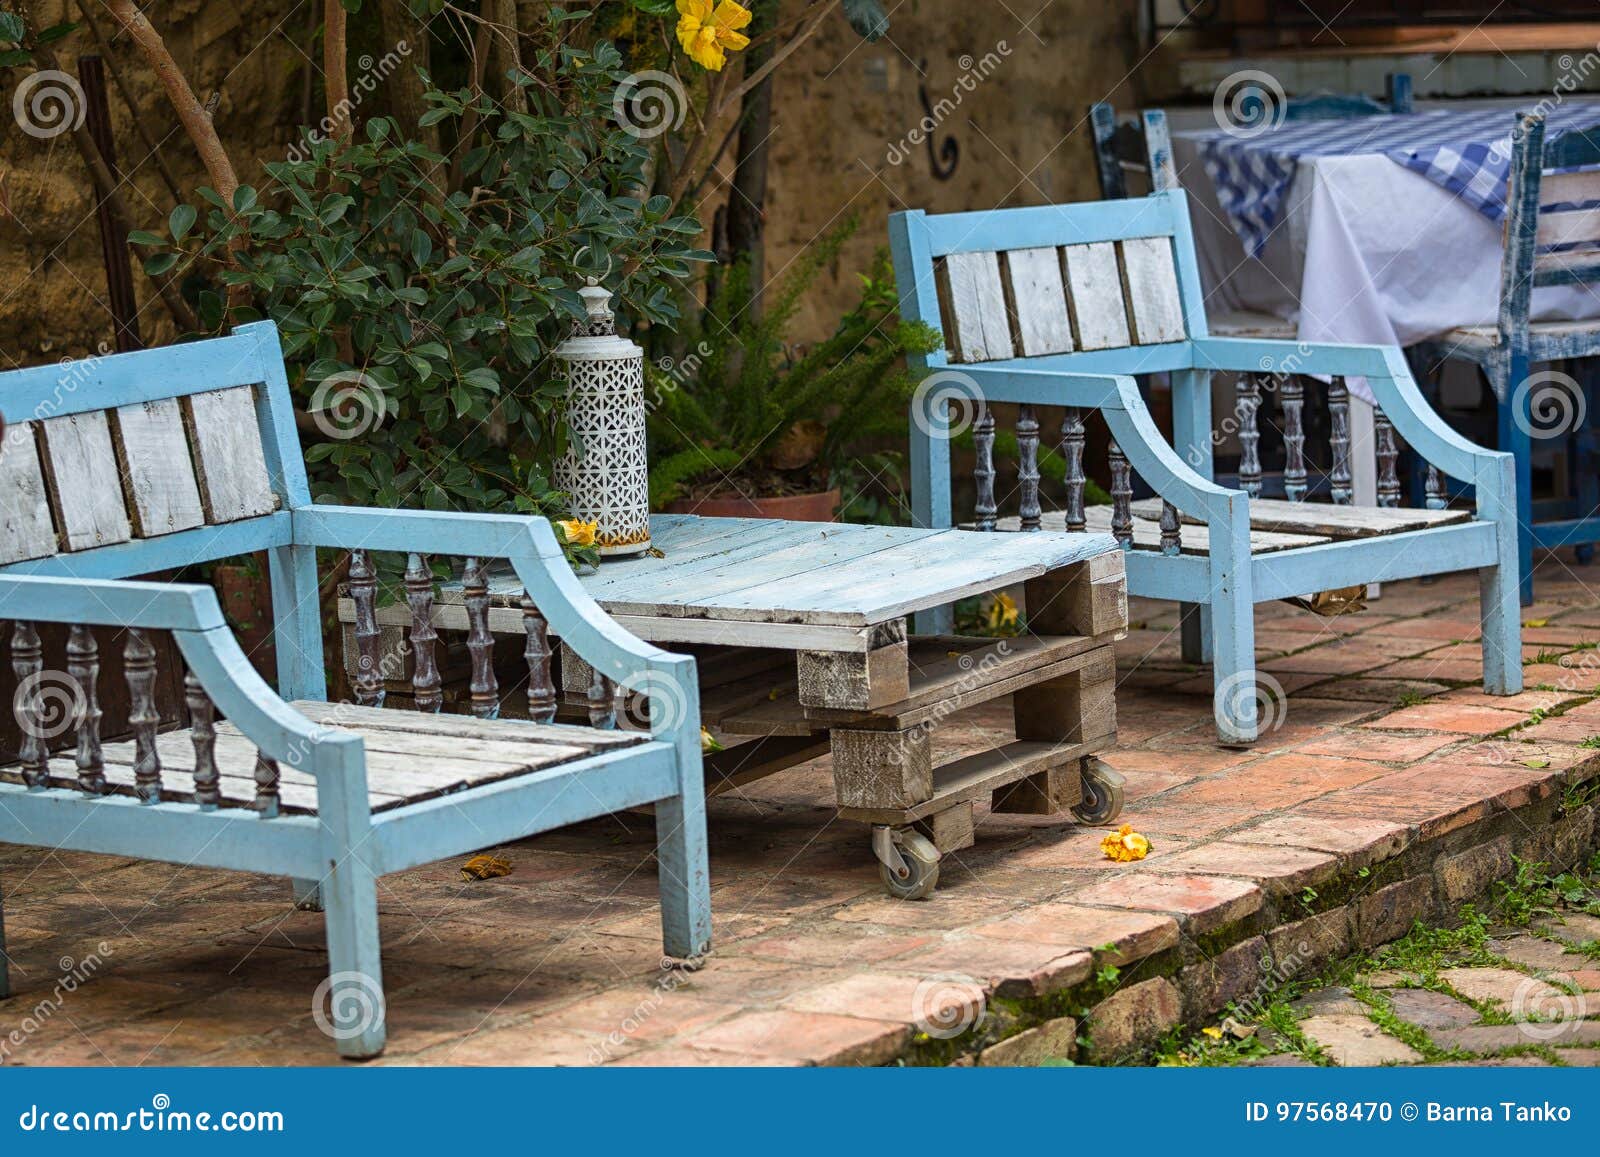 Patio Furniture Made Using Reclaimed Wood In Colombia Stock Photo